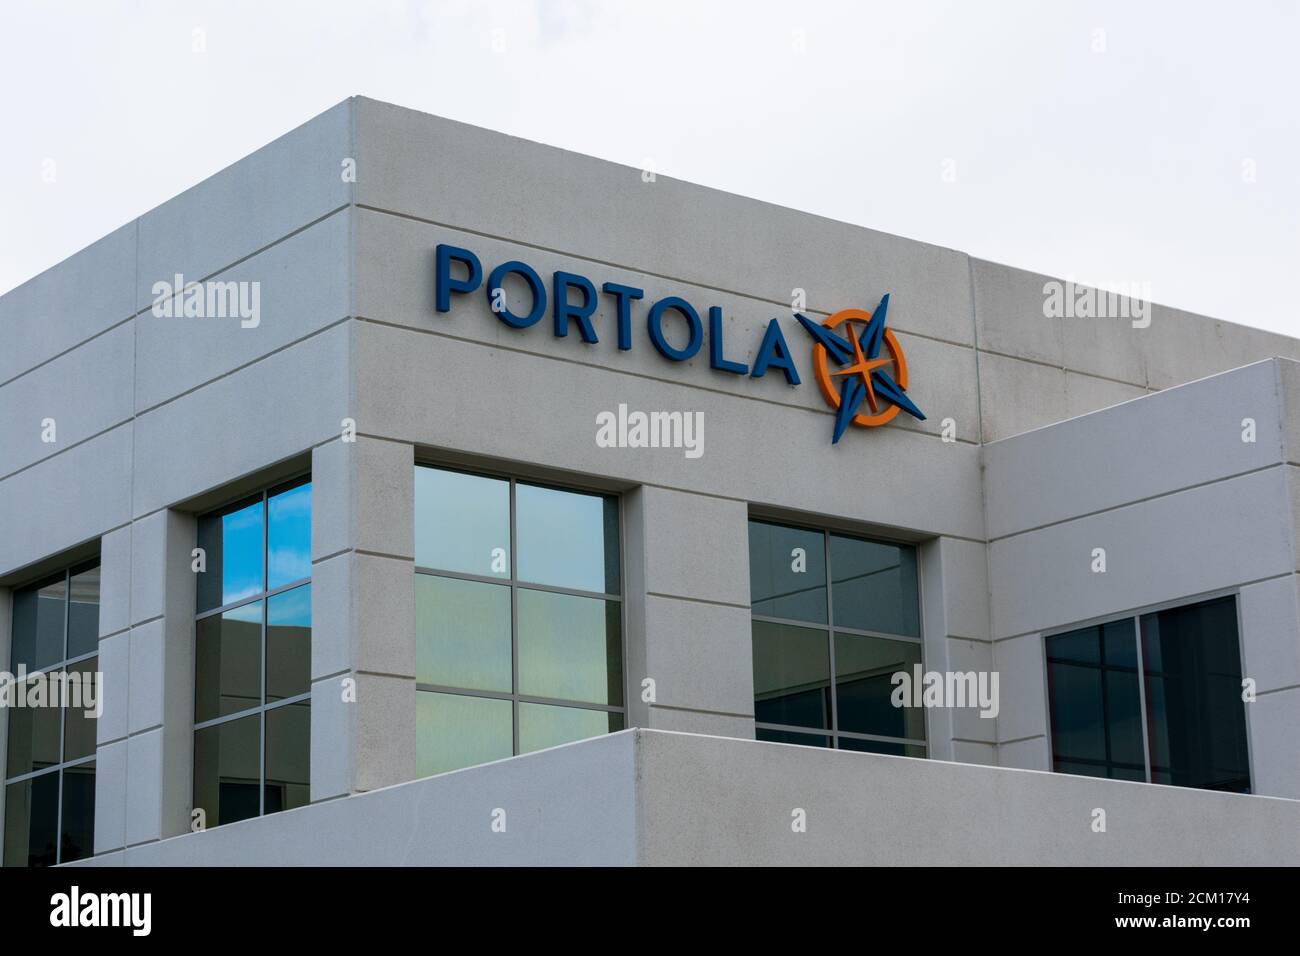 Portola Pharmaceuticals sign and logo. Portola Pharmaceuticals is an American clinical stage biotechnology company - South San Francisco, California, Stock Photo